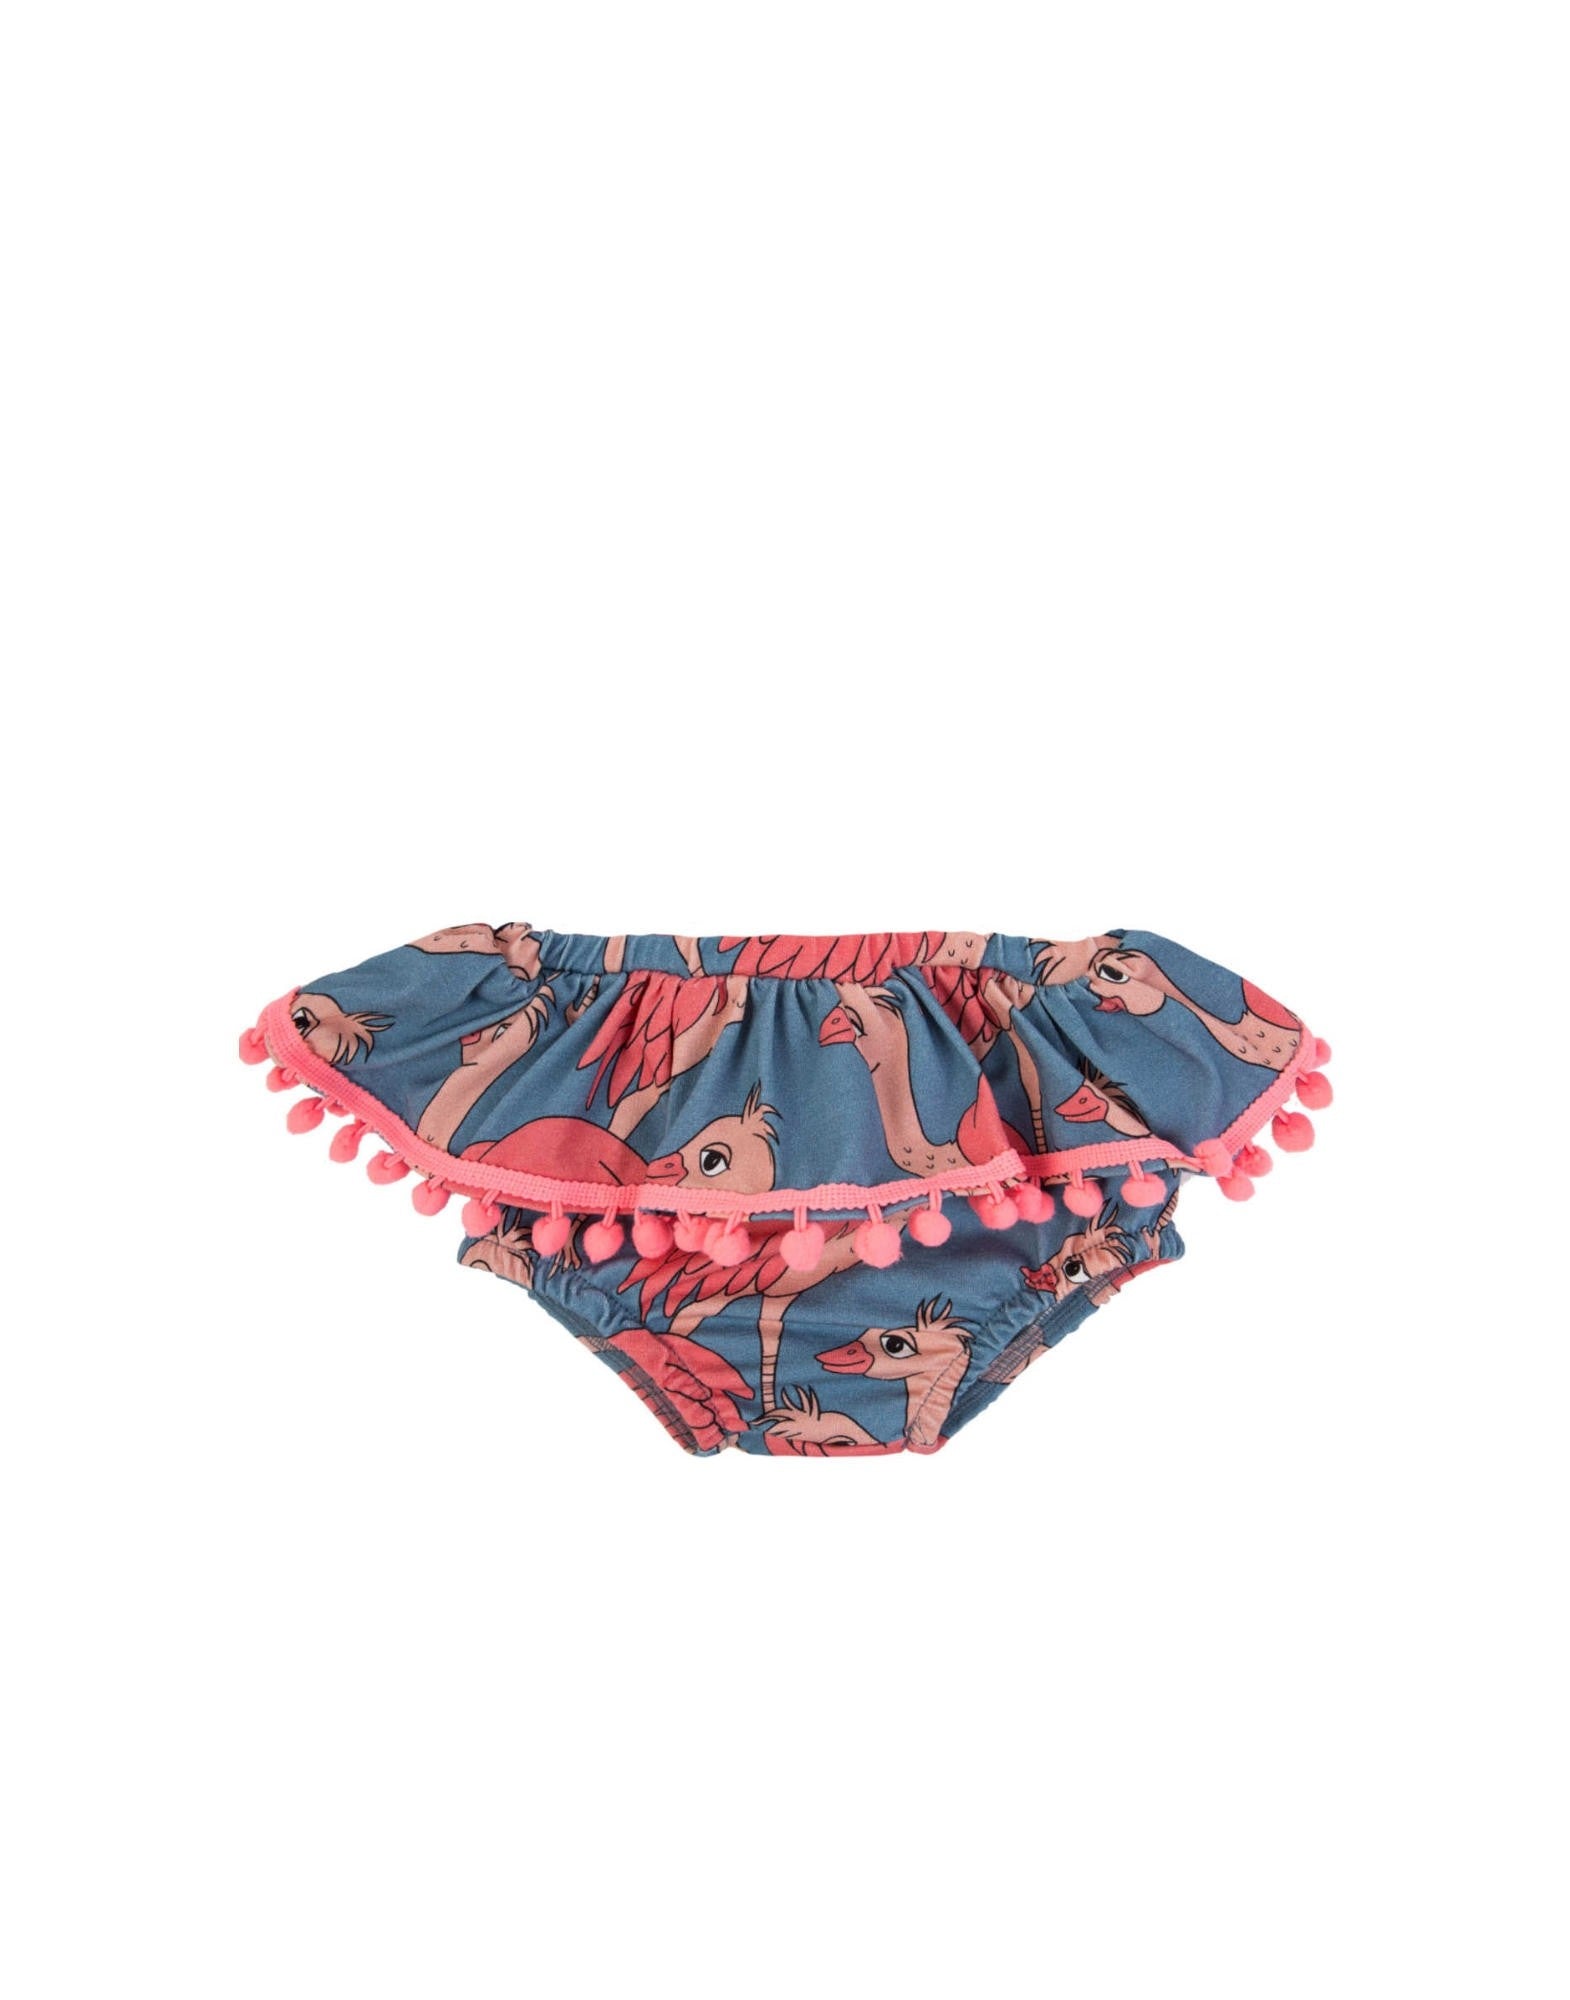 LADY OSTRICH BLUE BLOOMERS